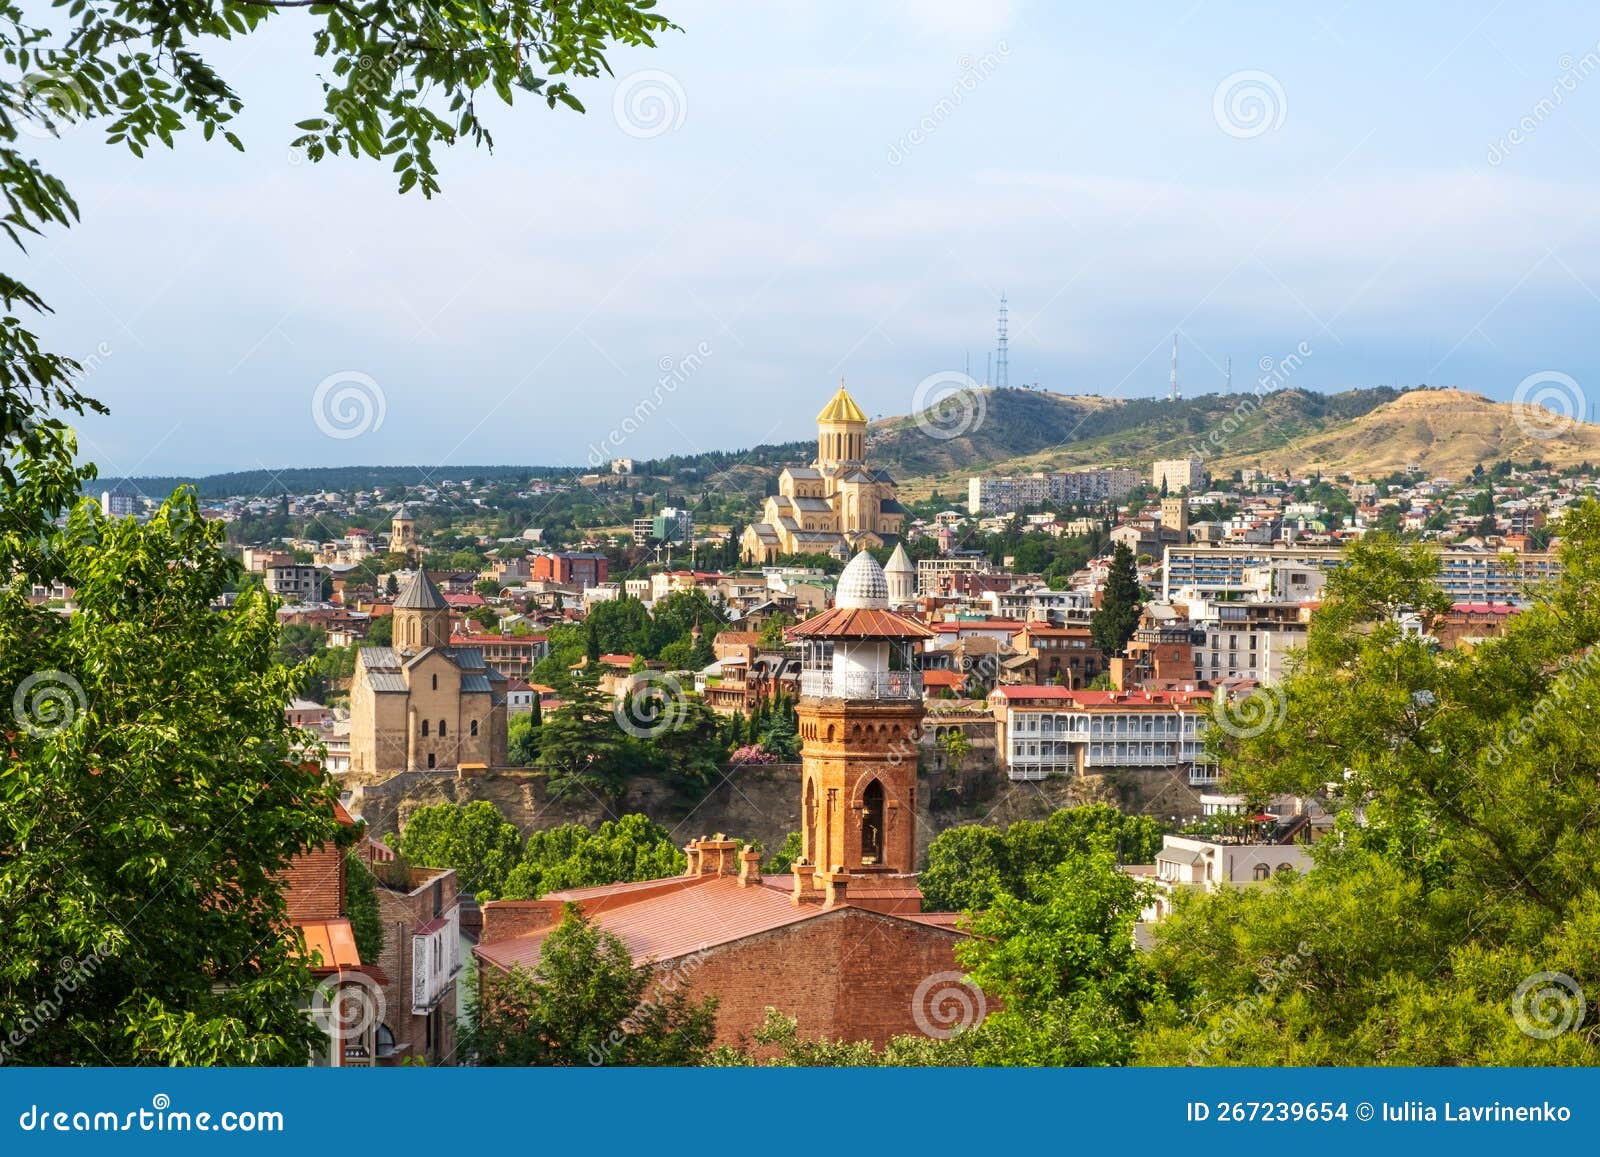 tbilisi old town with jumah mosque in sulfur baths district, metekhi church on bank of river kura and sameba cathedral